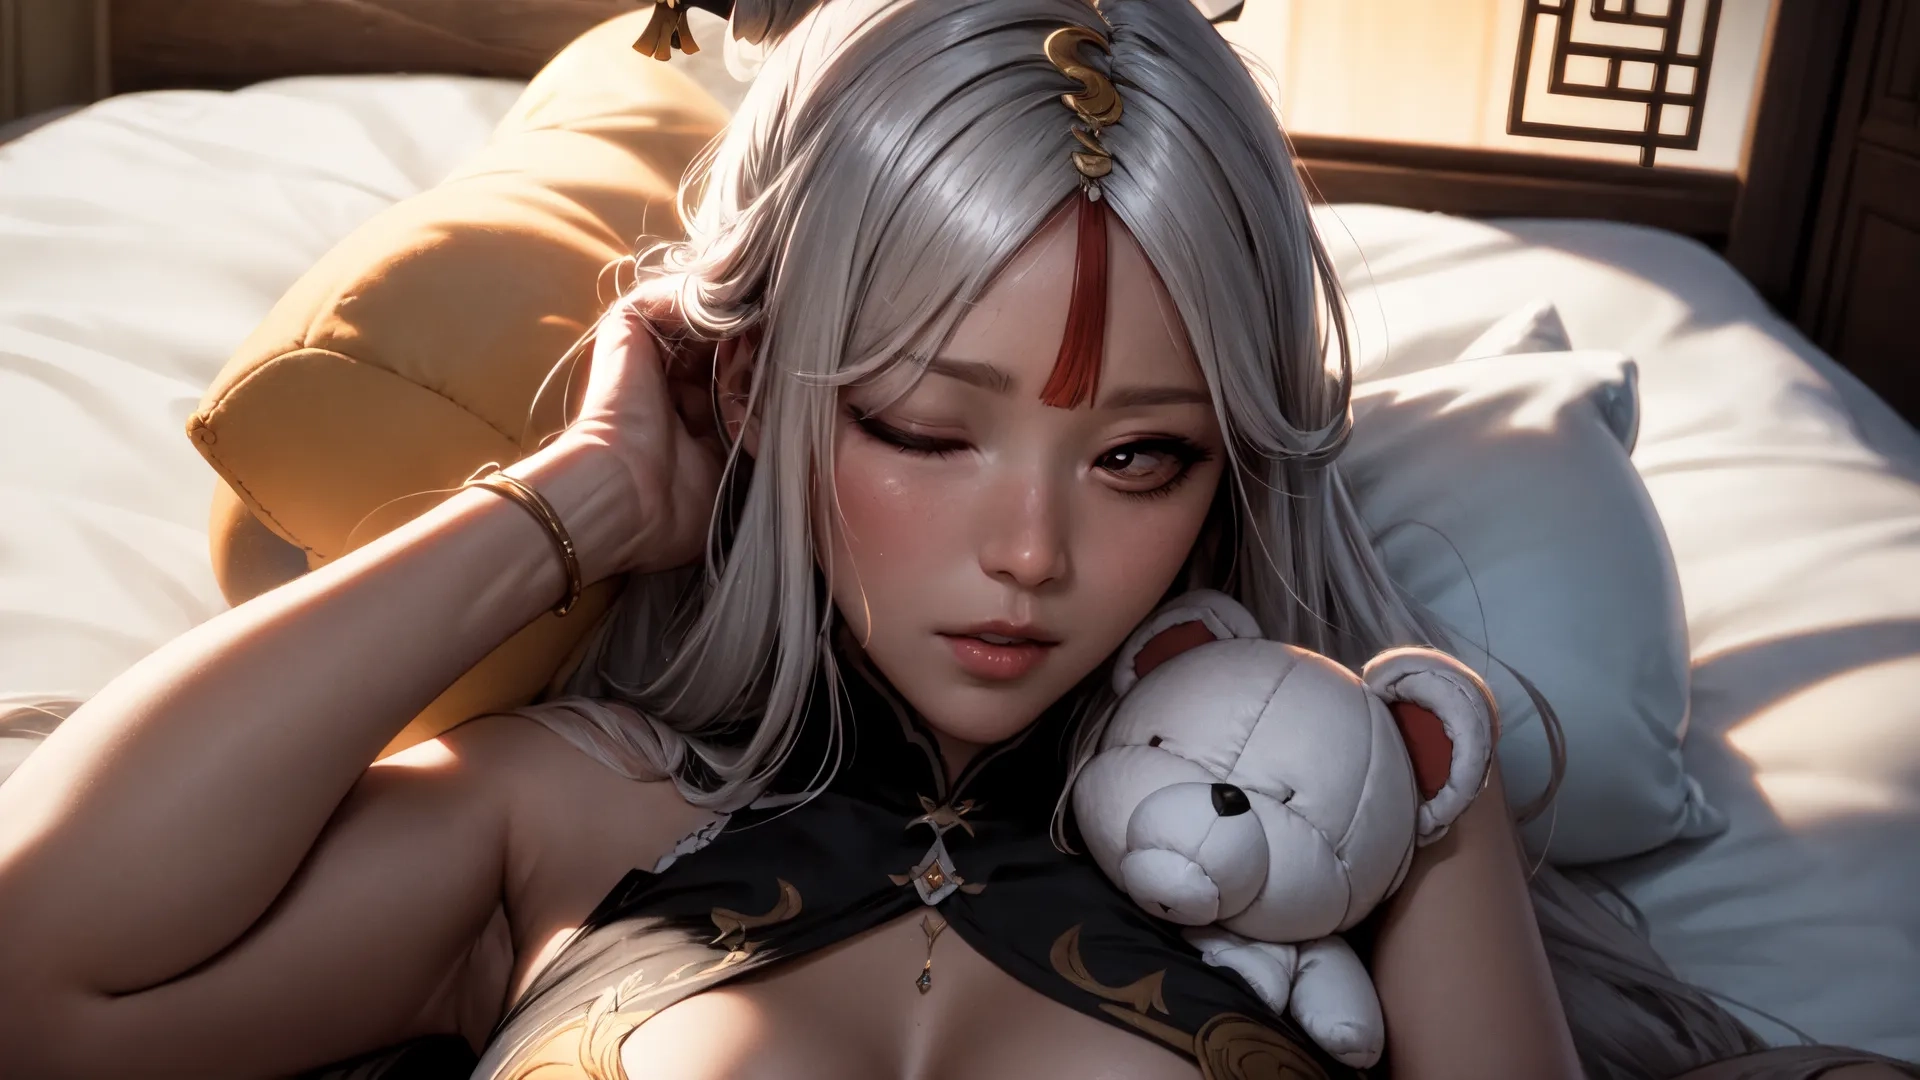 a female holding a white stuffed bear in her right hand and sitting on a bed wearing clothing like a princess with black stripes on it's chest
